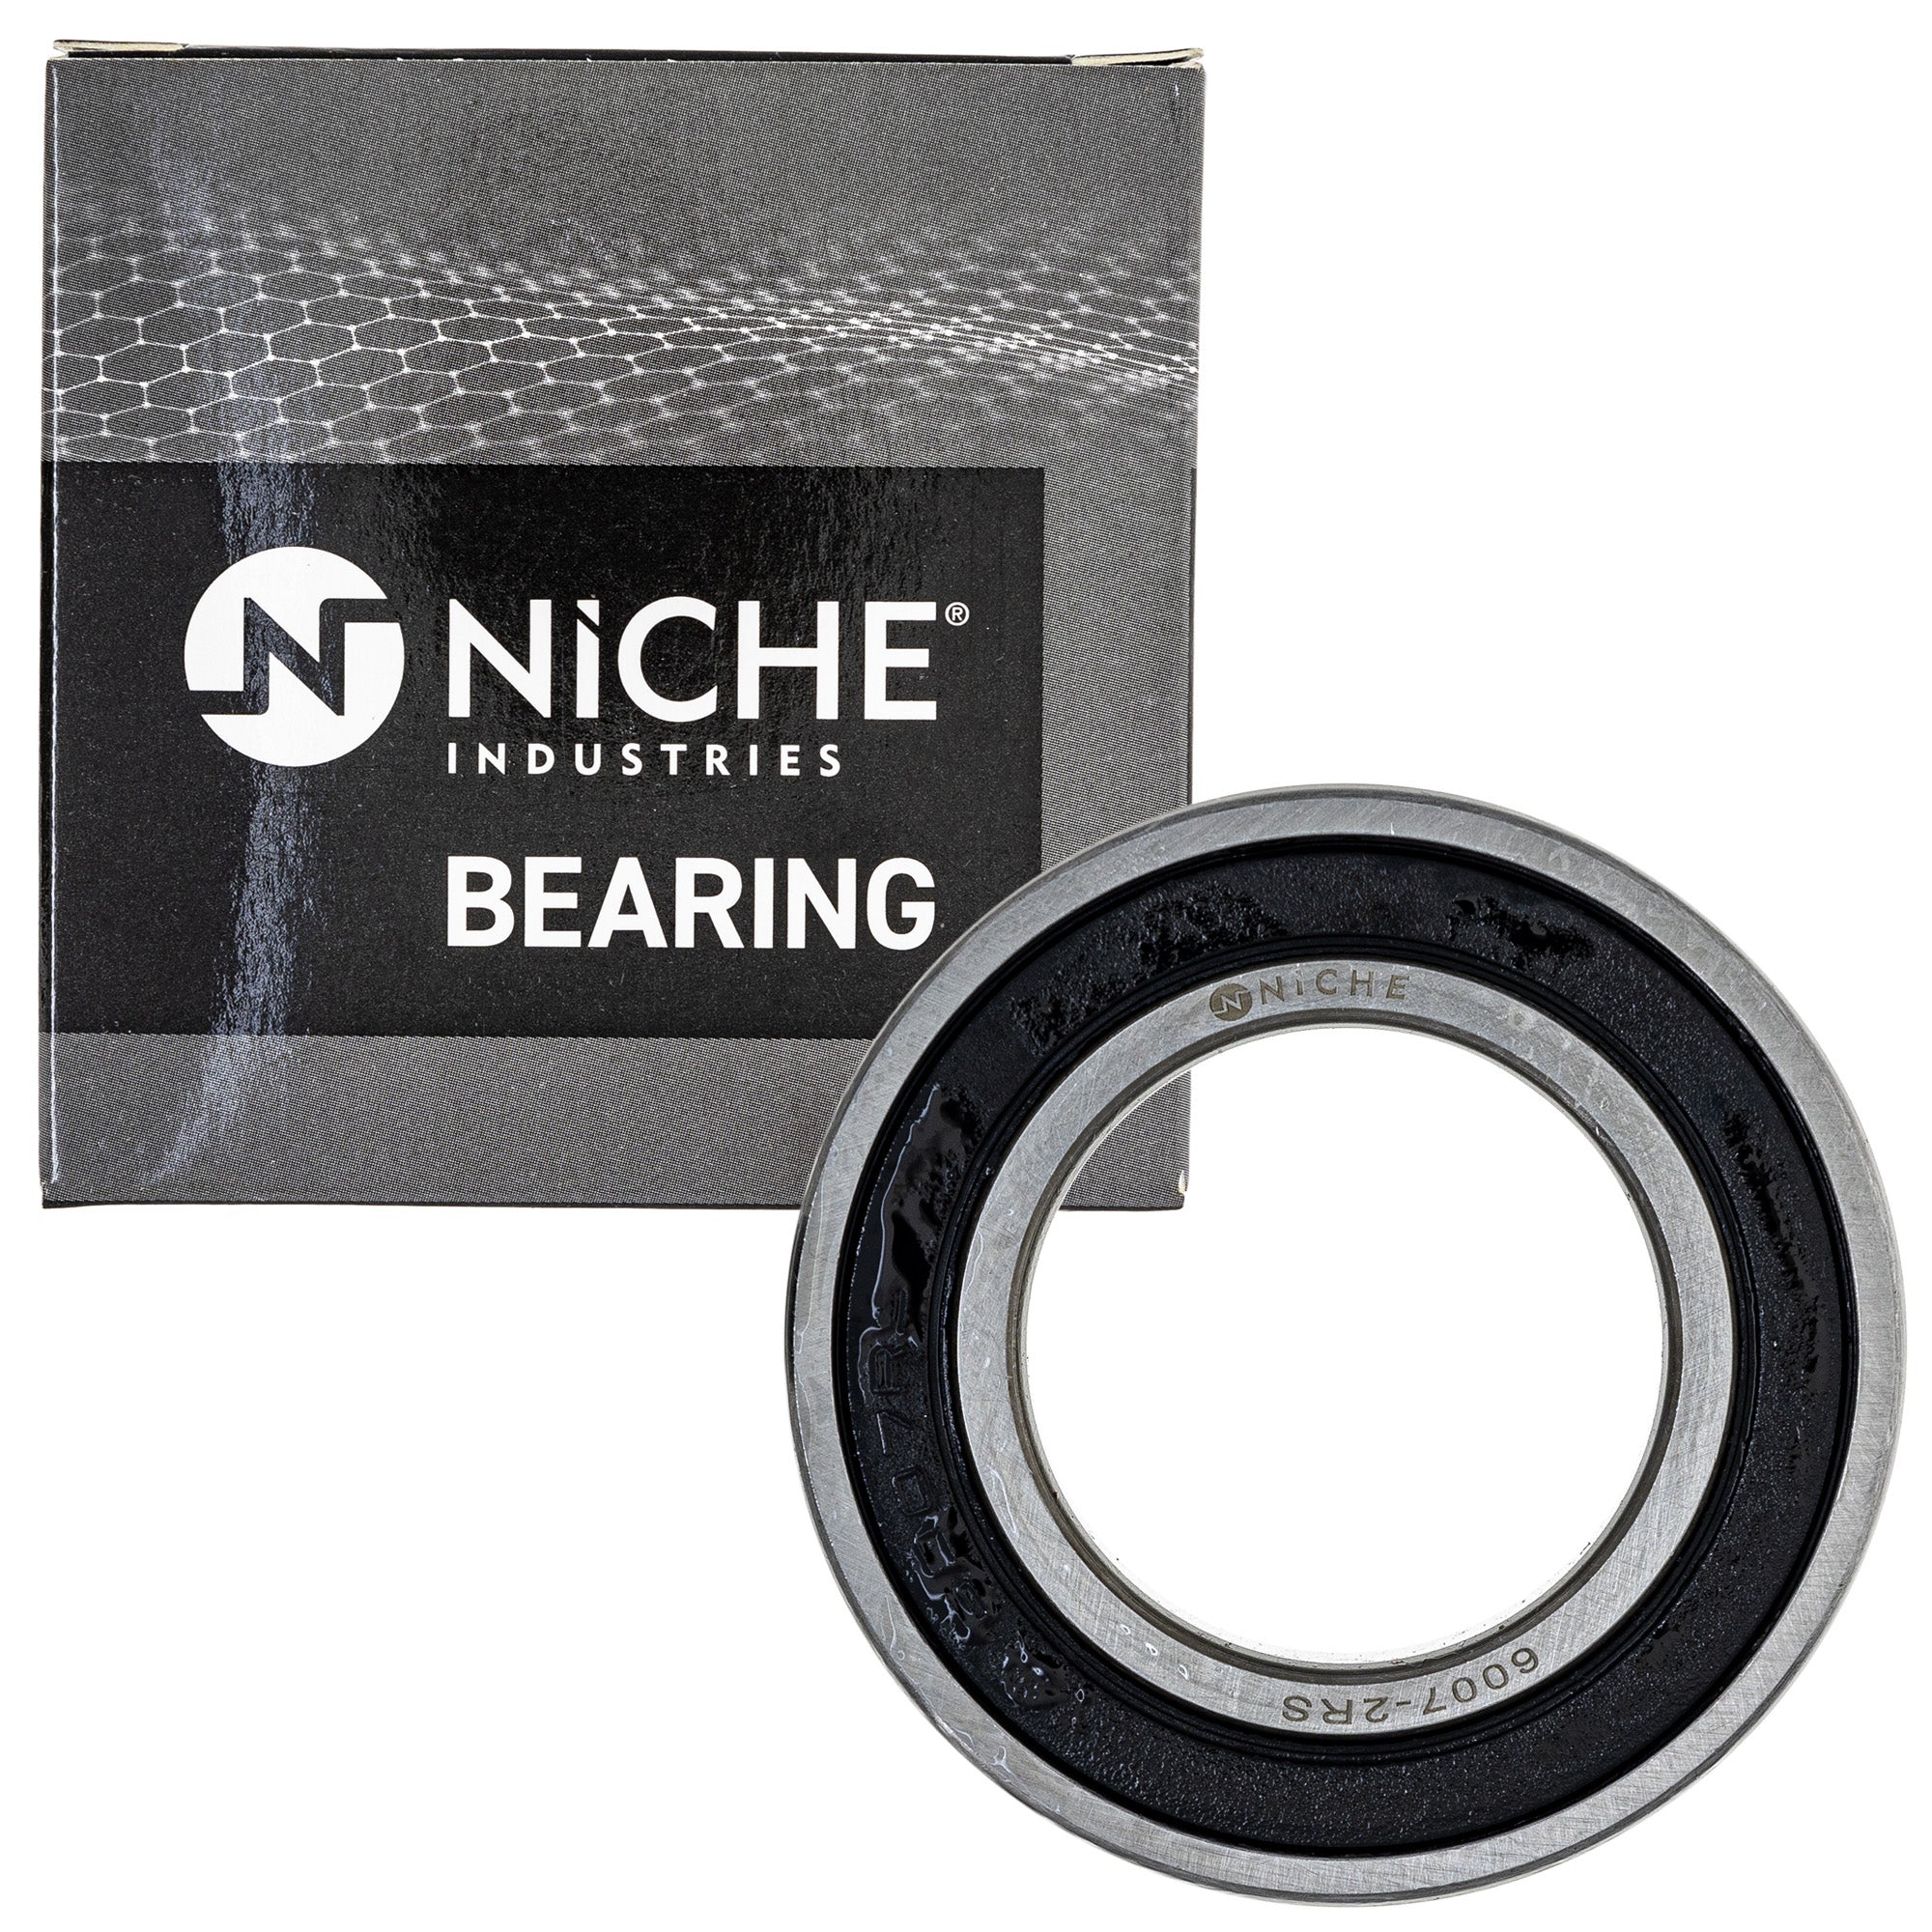 NICHE MK1009110 Wheel Bearing Seal Kit for zOTHER Grizzly FourTrax